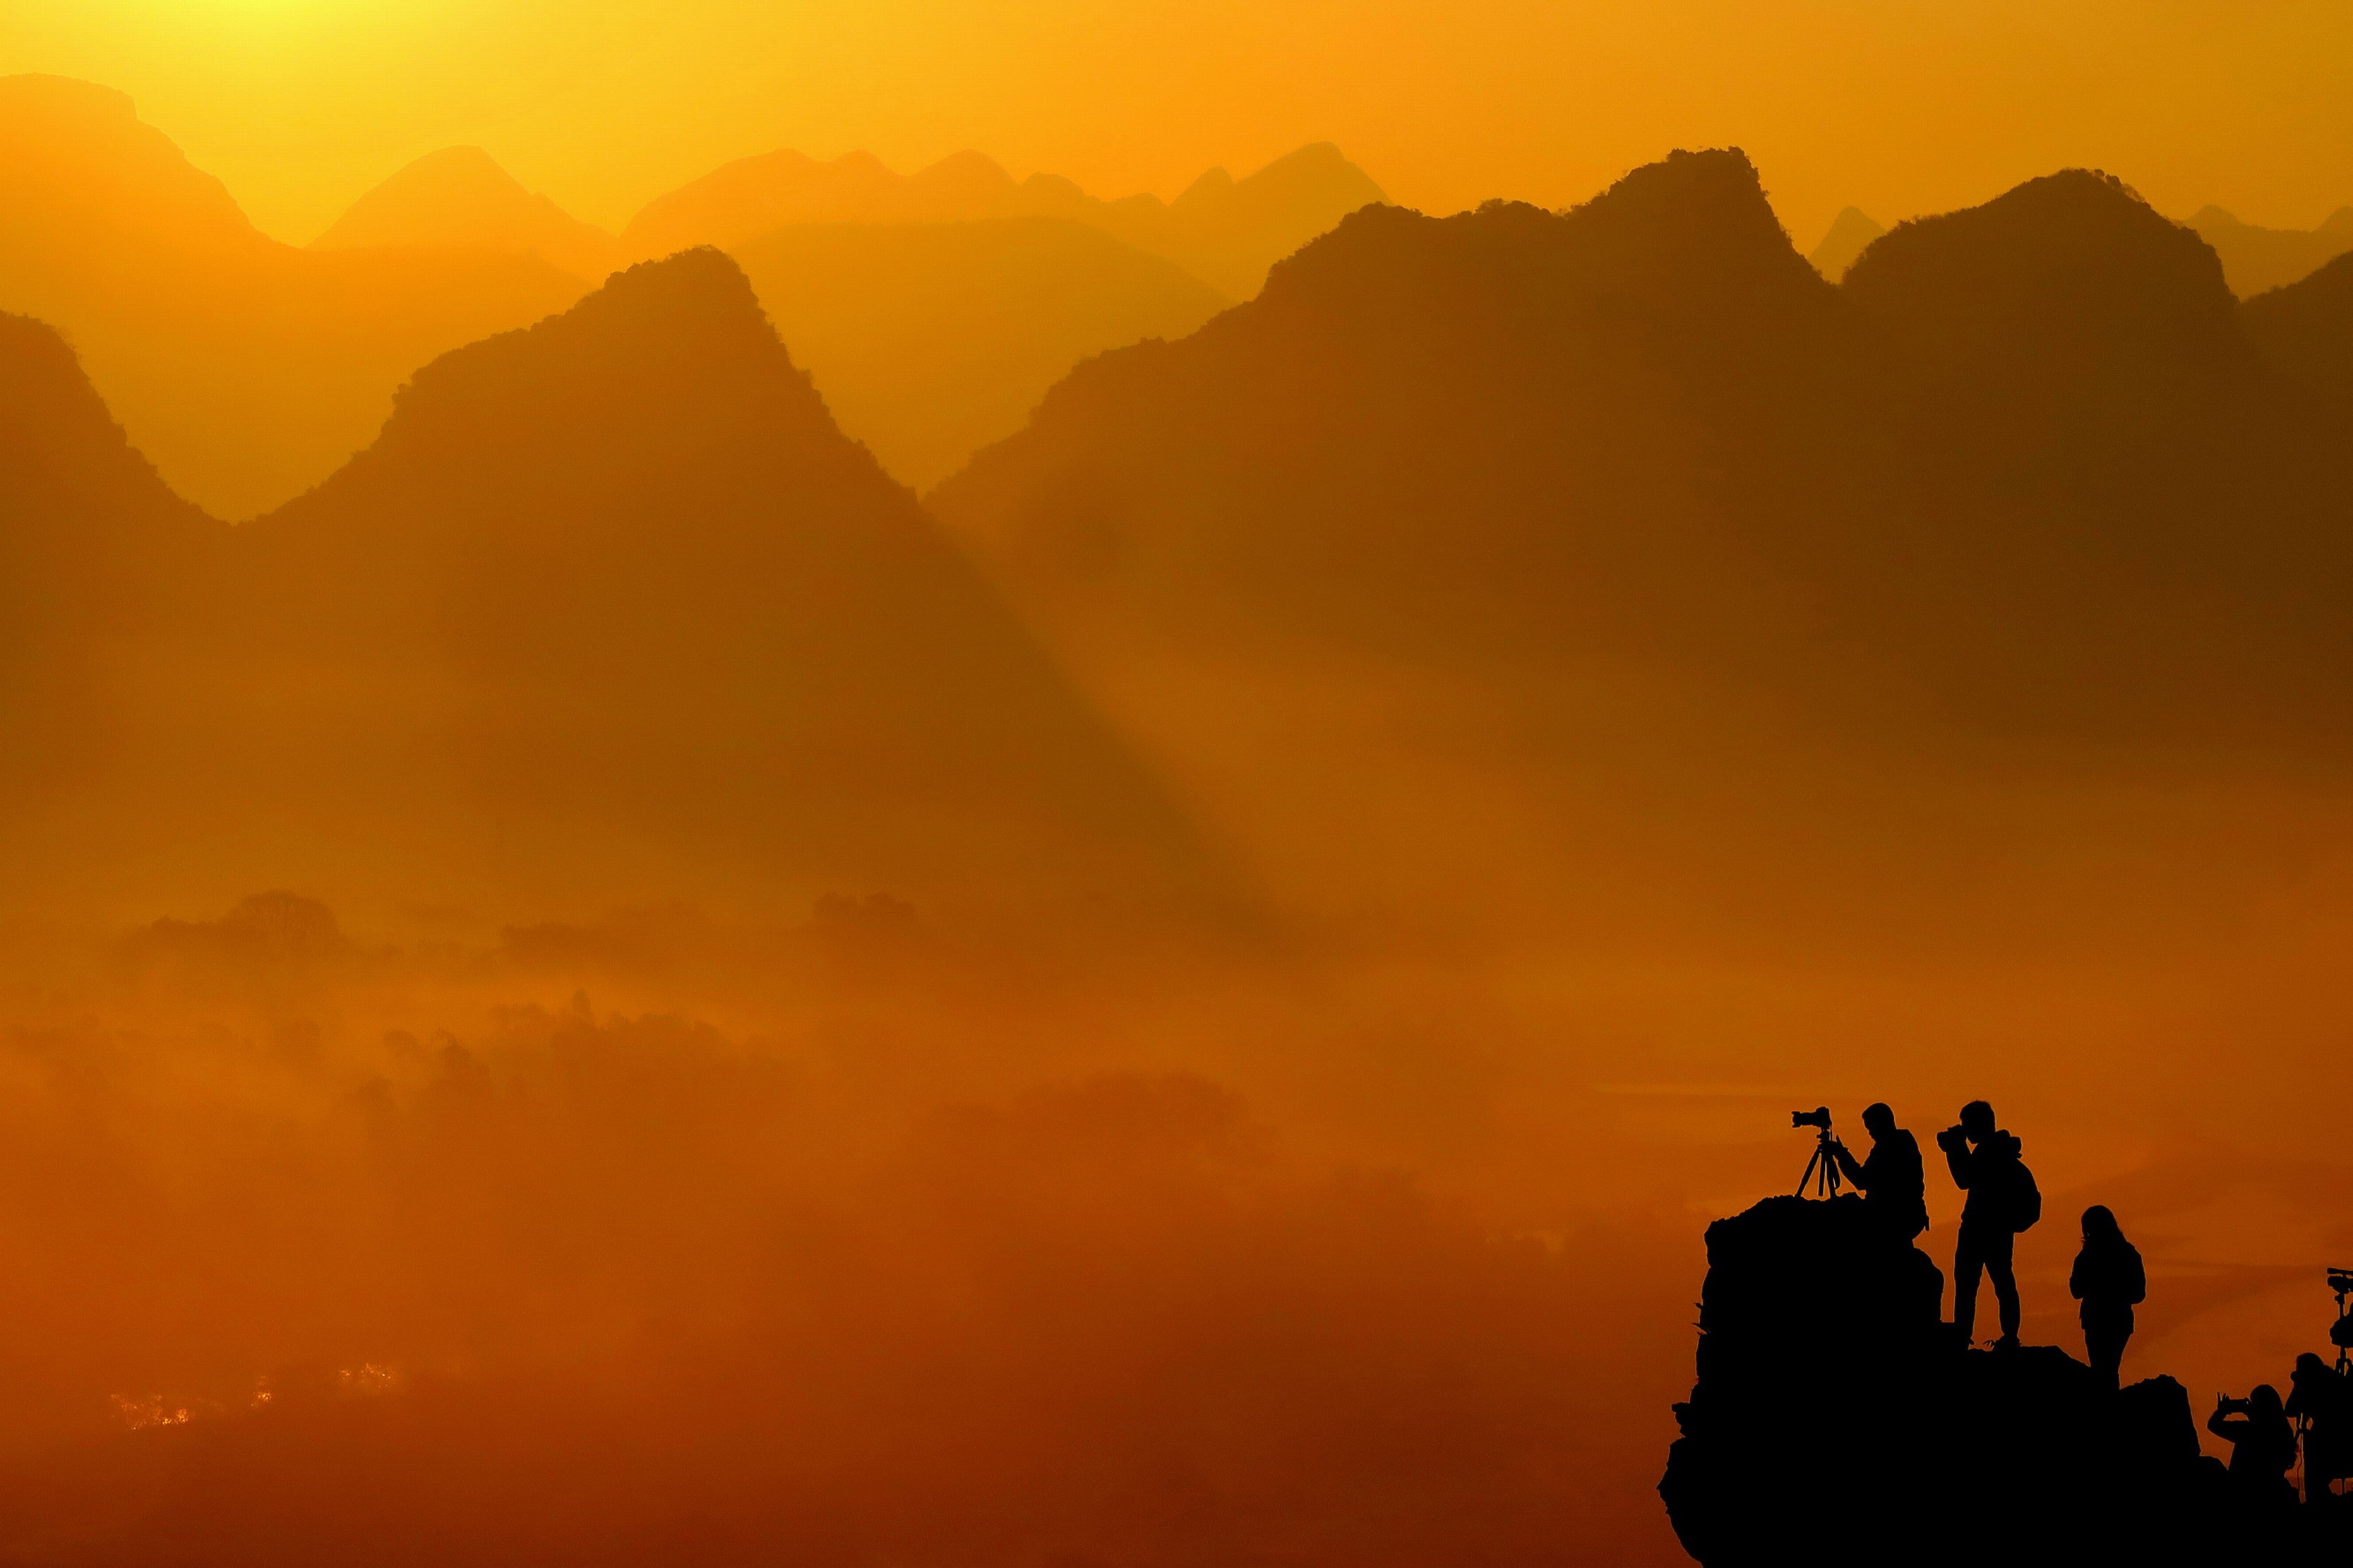 Yangshuo is the most popular international rock climbing destination within China, says Andrew Hedesh’s new book. Photo: Xinhua